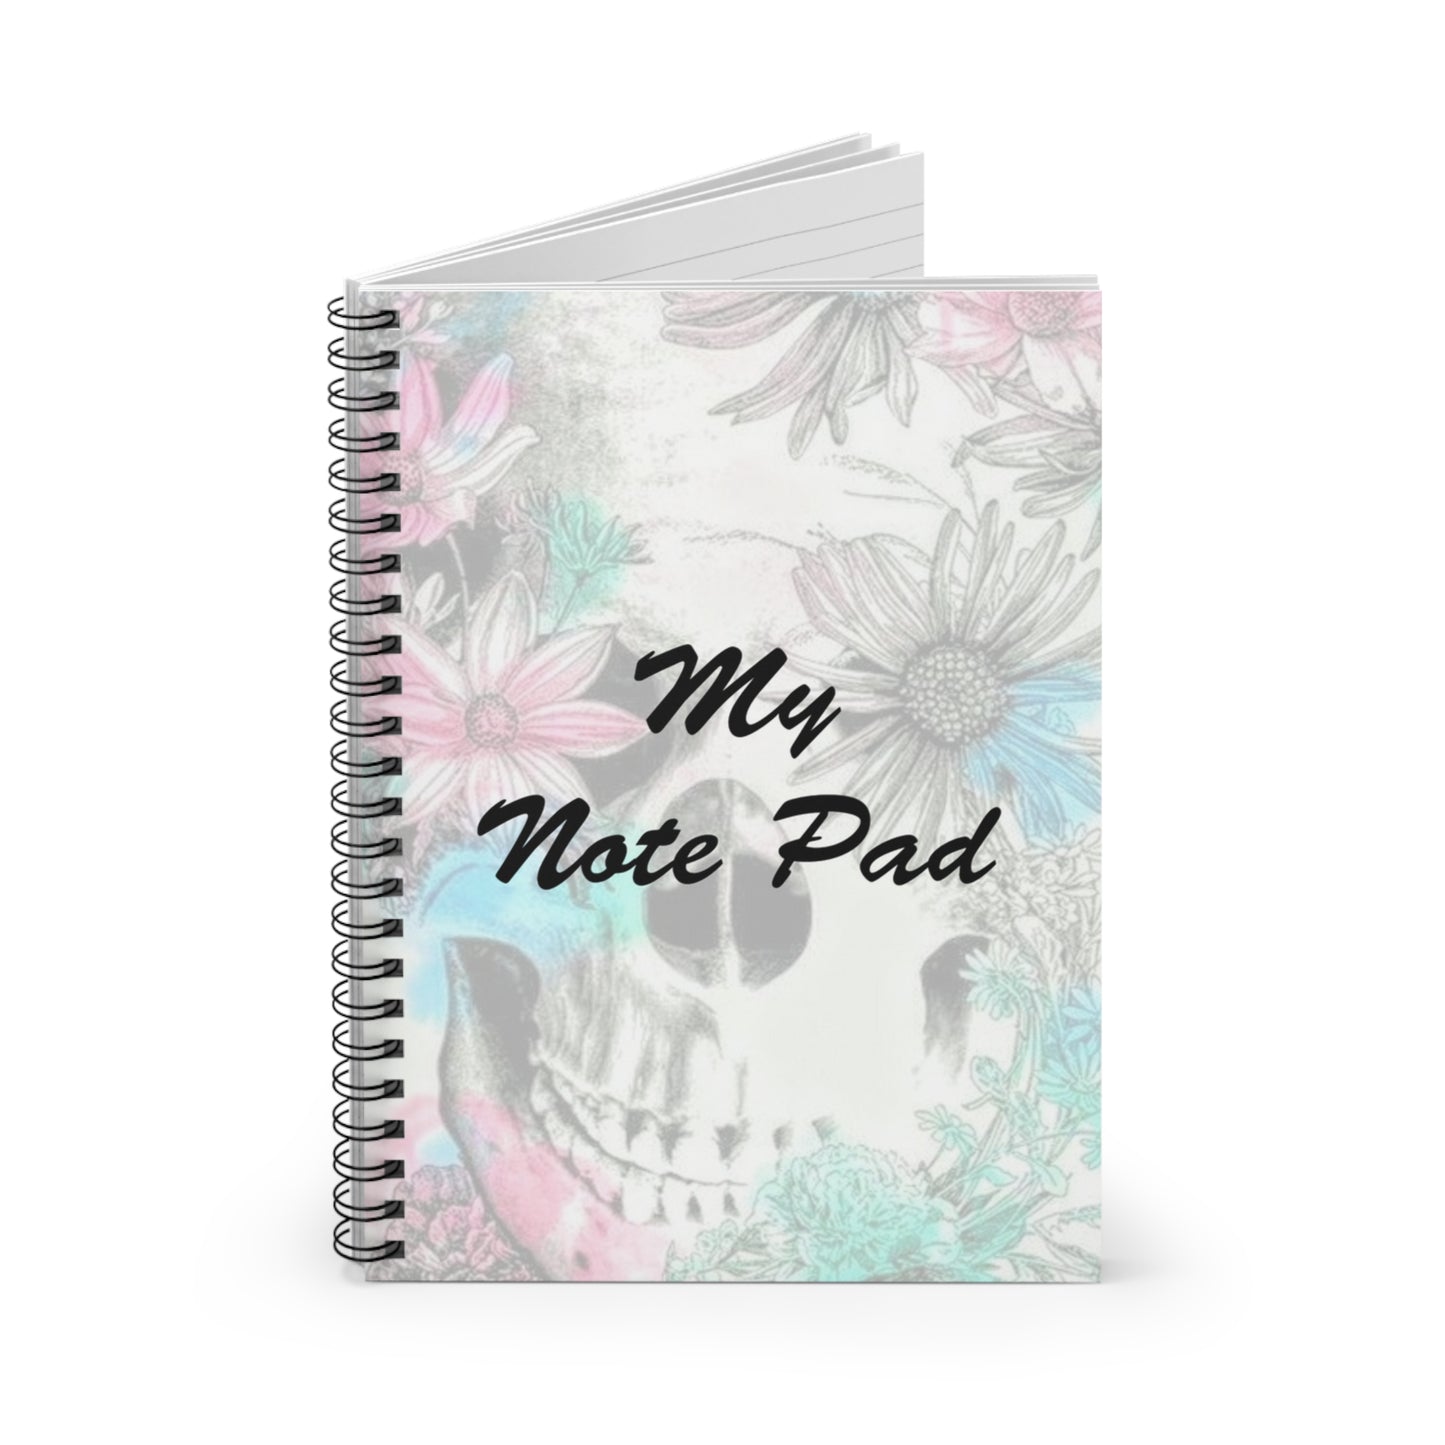 skull with flowers Spiral Notebook - Ruled Line